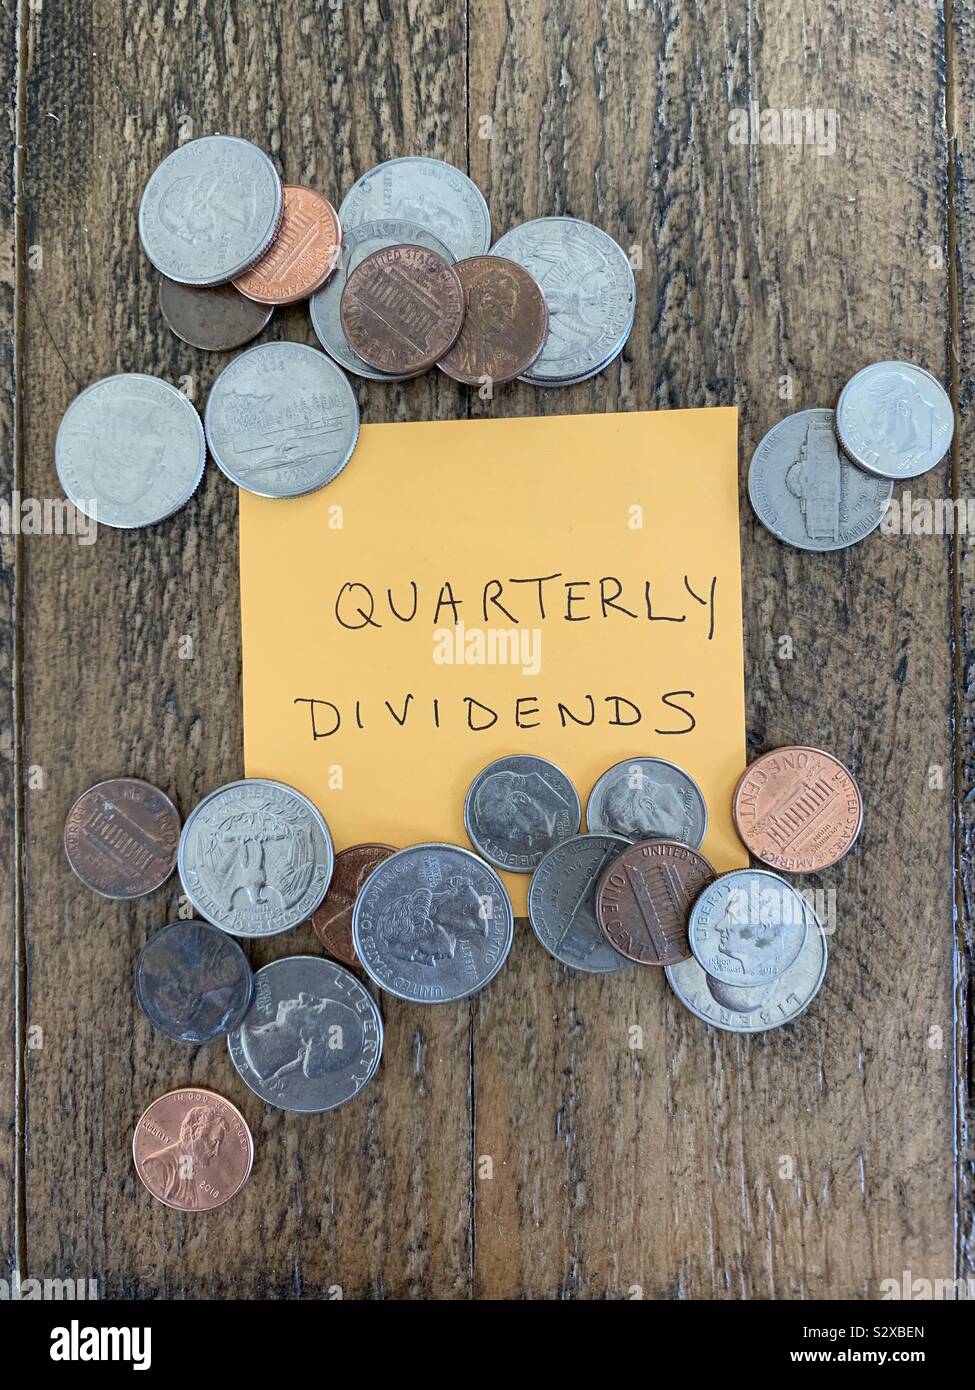 Quarterly dividends from stock in U.S. coins Stock Photo